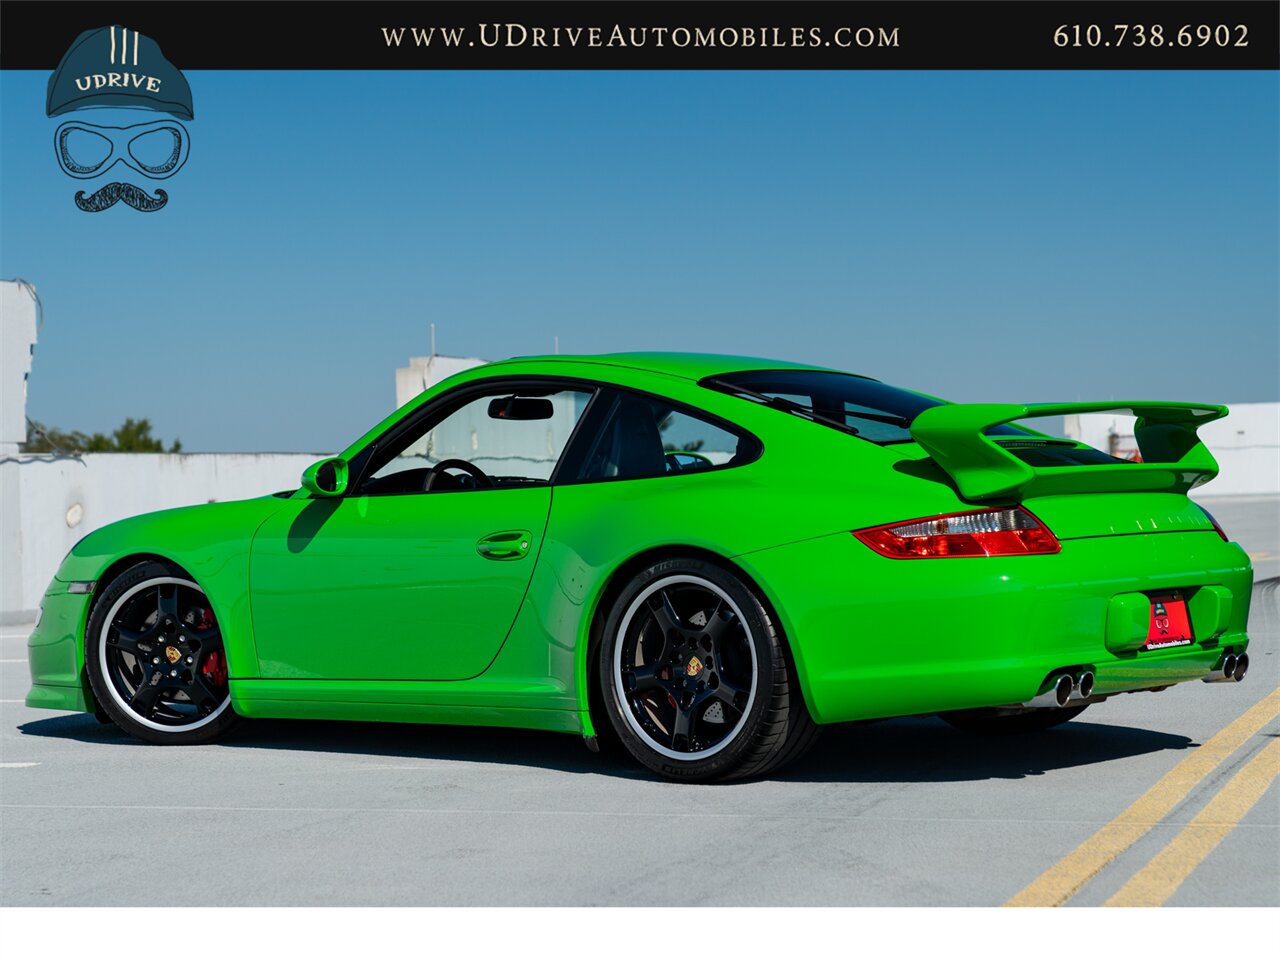 2006 Porsche 911 Carrera 4S  997 PTS Signal Green 6Sp Sport Sts Spt Chrono Spt Exhst - Photo 5 - West Chester, PA 19382